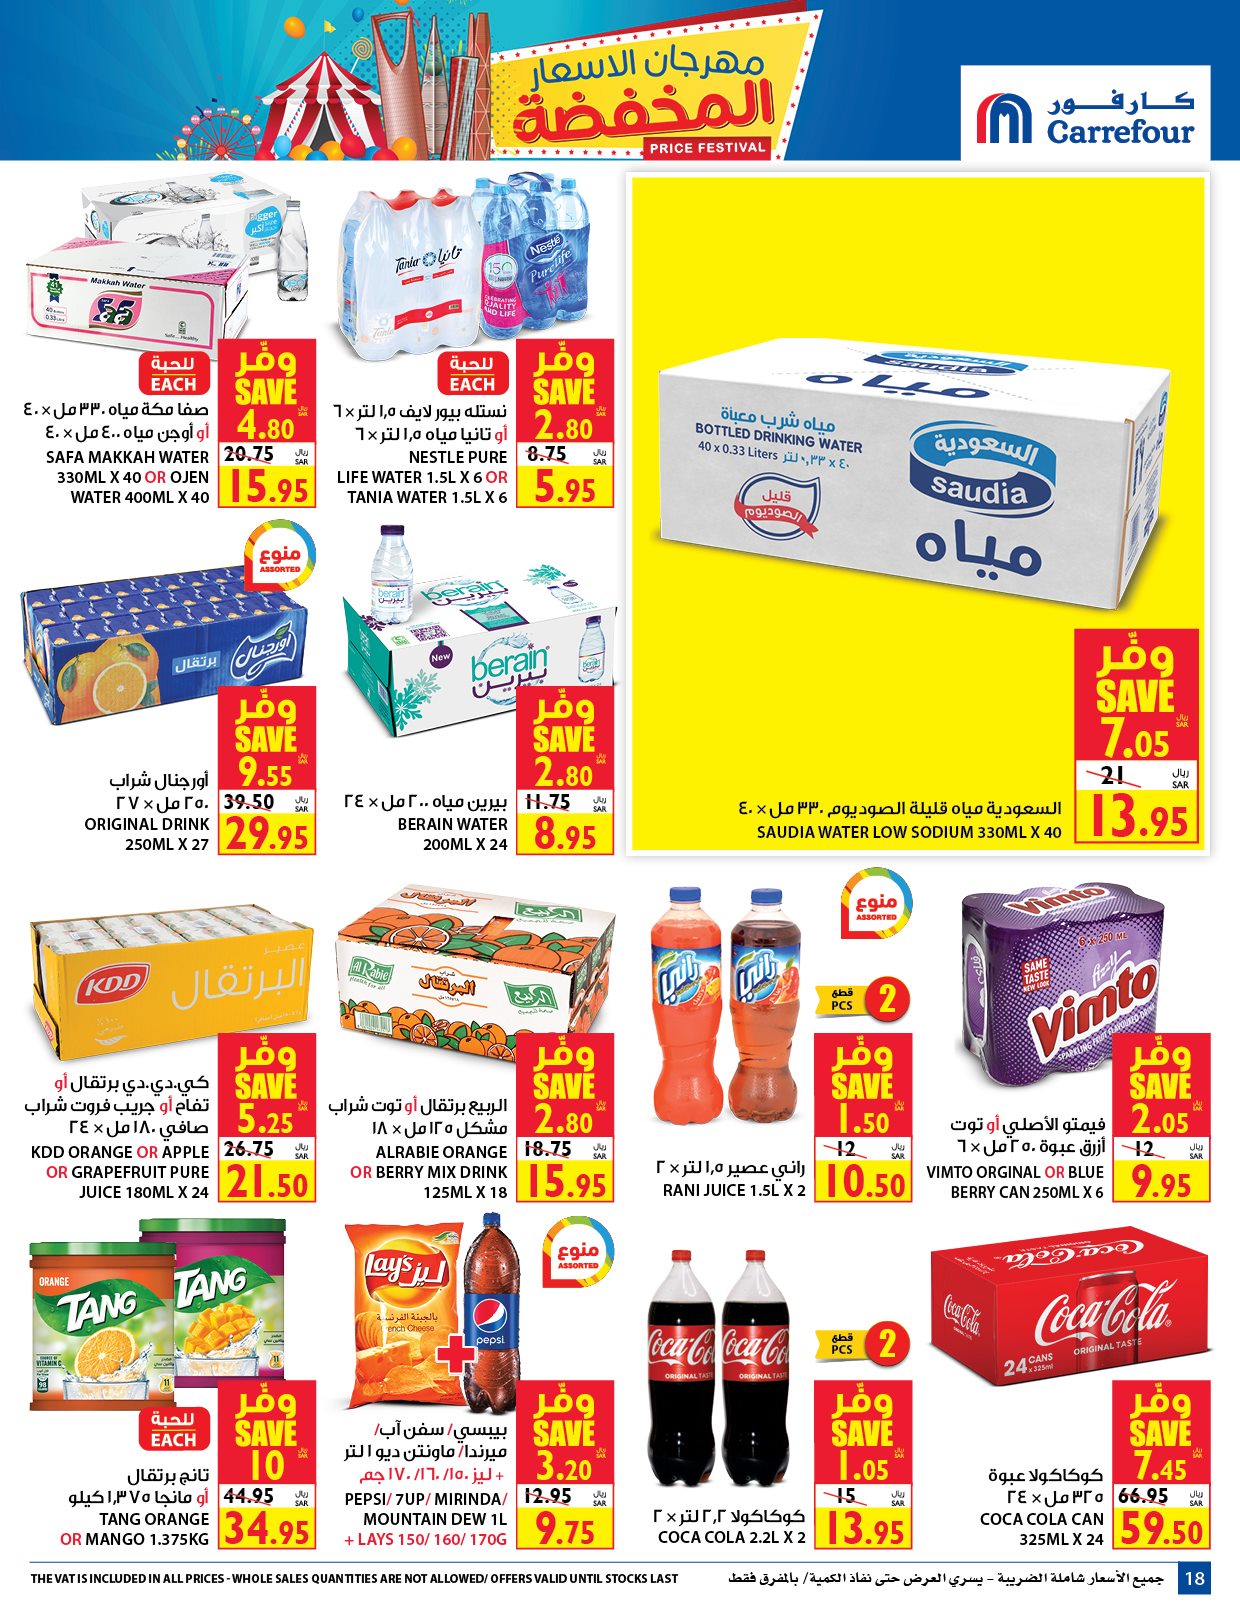 Carrefour Festival Offers from 12/8 till 25/8 | Carrefour KSA 19